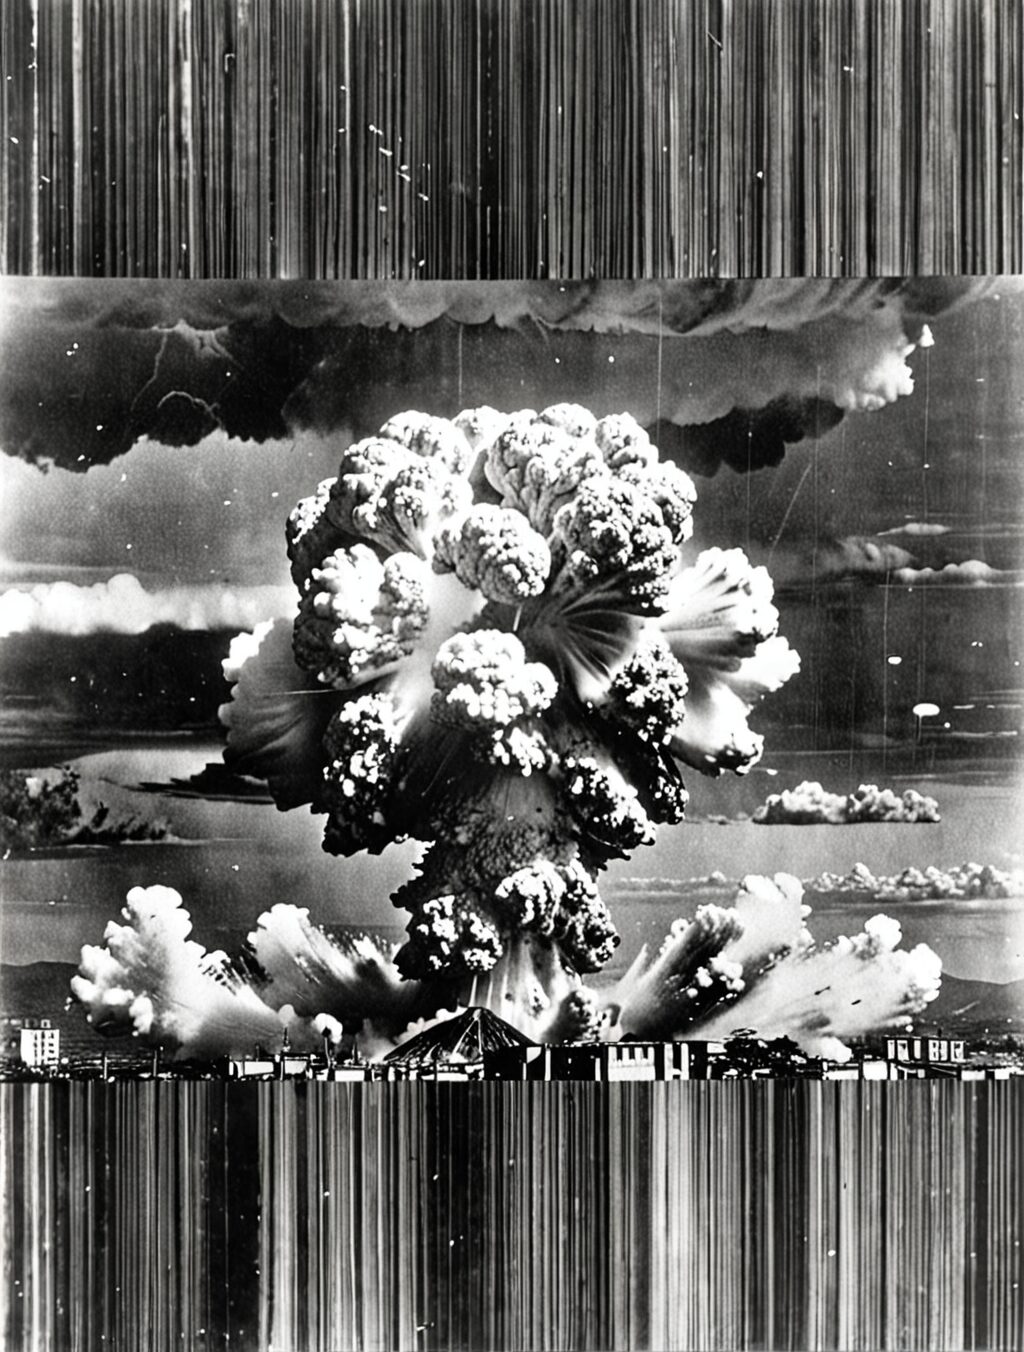 why were atomic bombs used on japan apex brainly